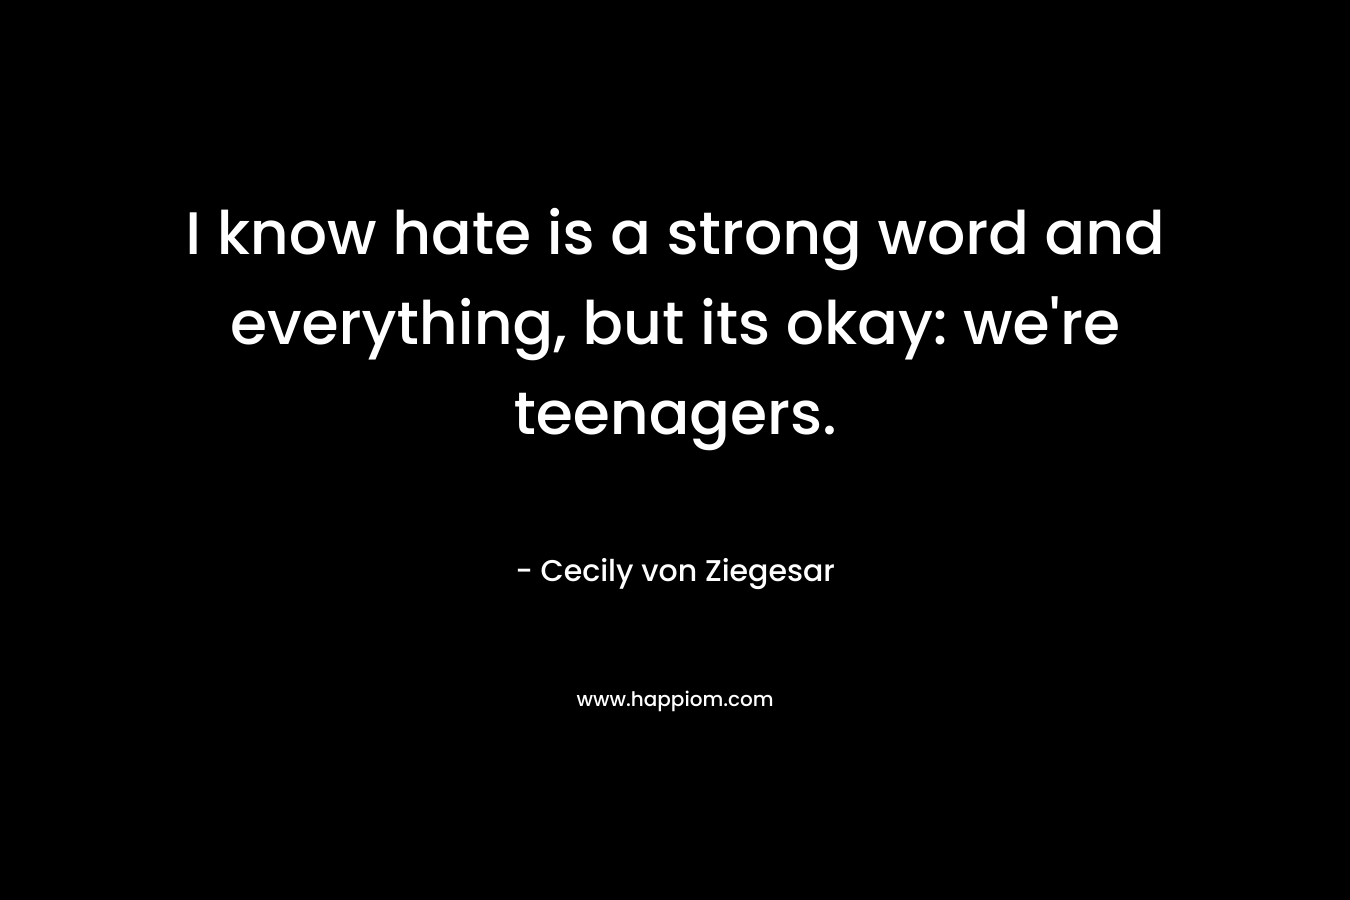 I know hate is a strong word and everything, but its okay: we’re teenagers. – Cecily von Ziegesar